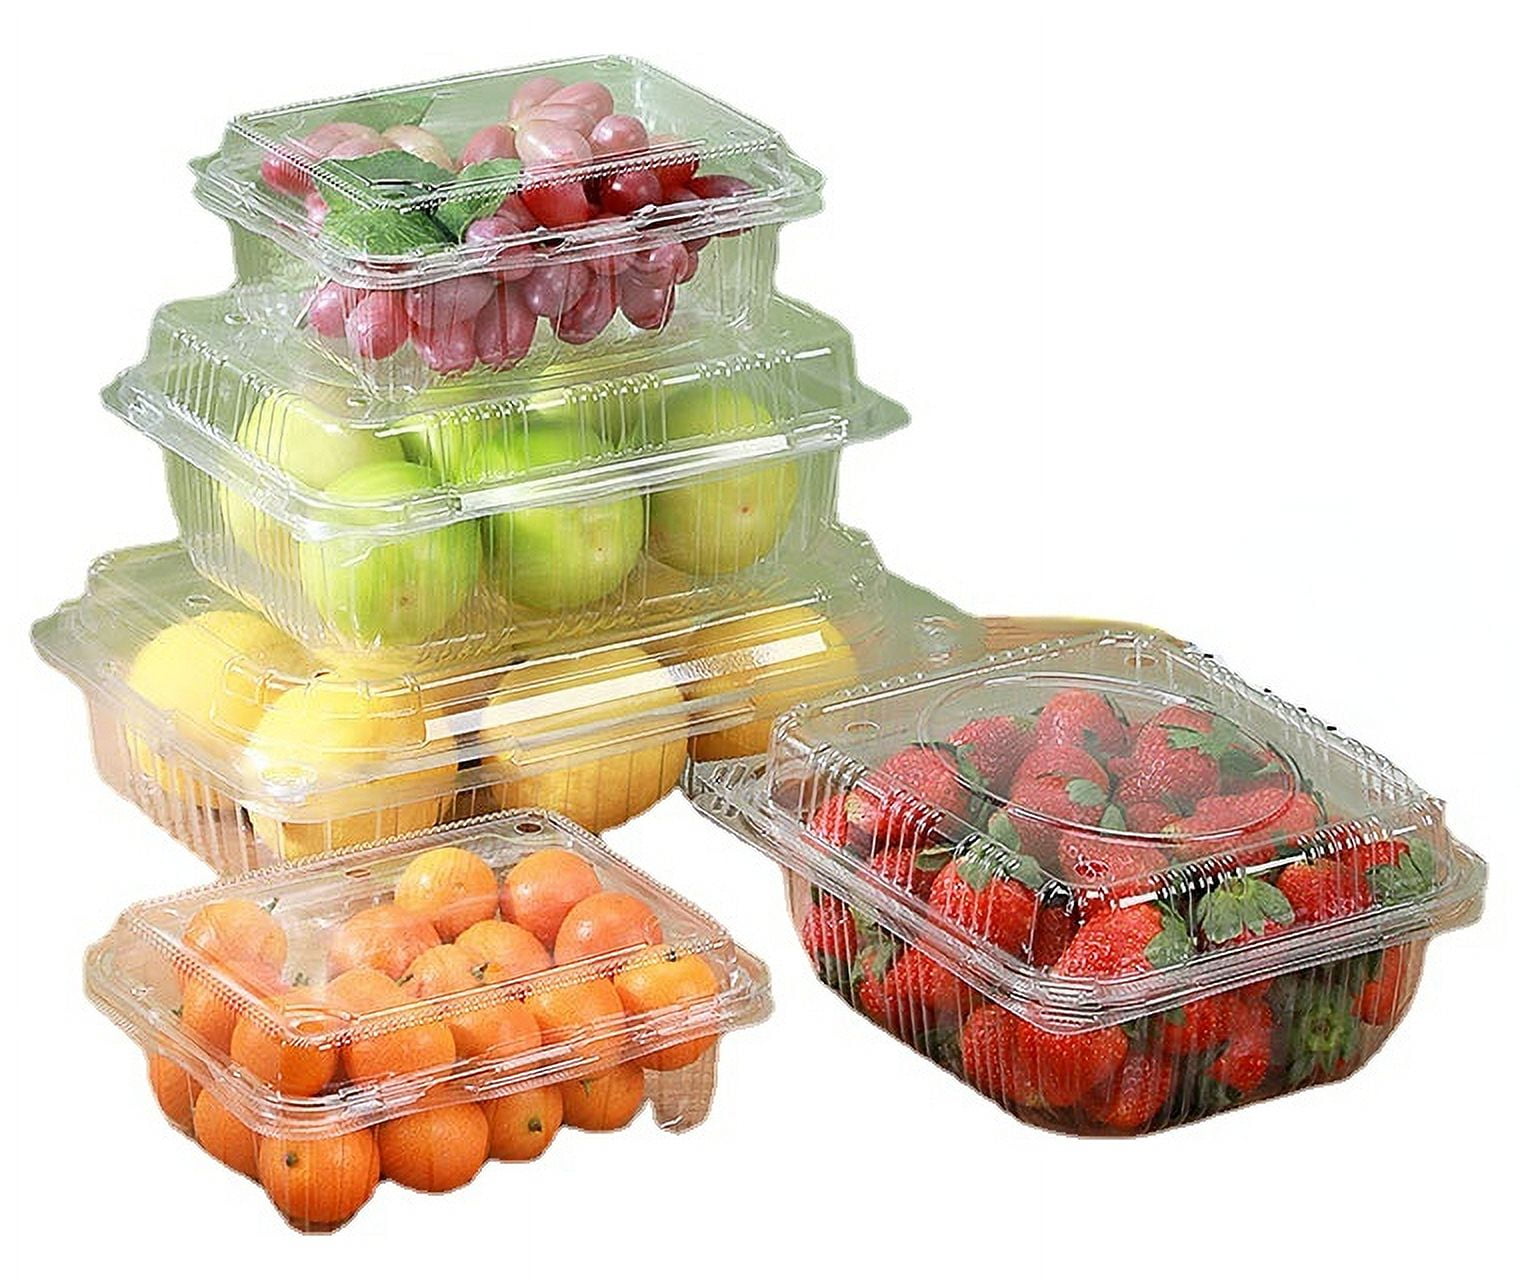 Disposable Dragon Fruit Packaging Lunch Box PET Plastic - Easy Green Eco  Packaging Co., Ltd.